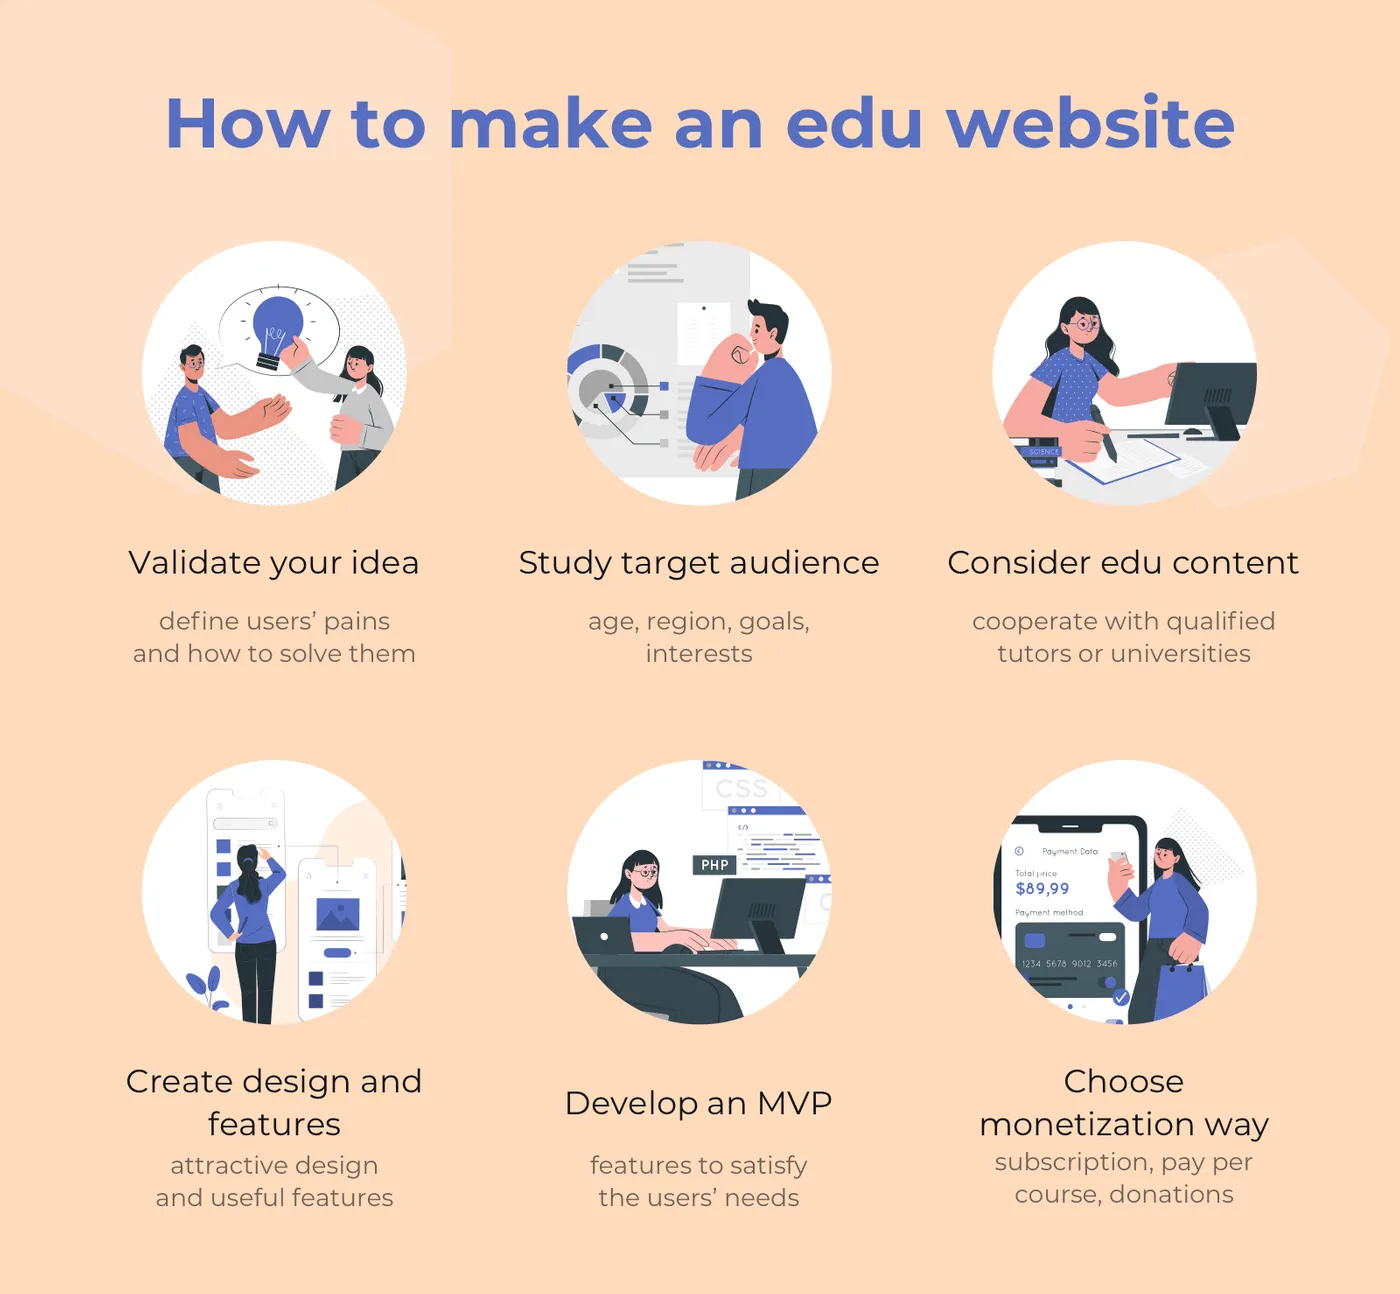 How to make an educational website